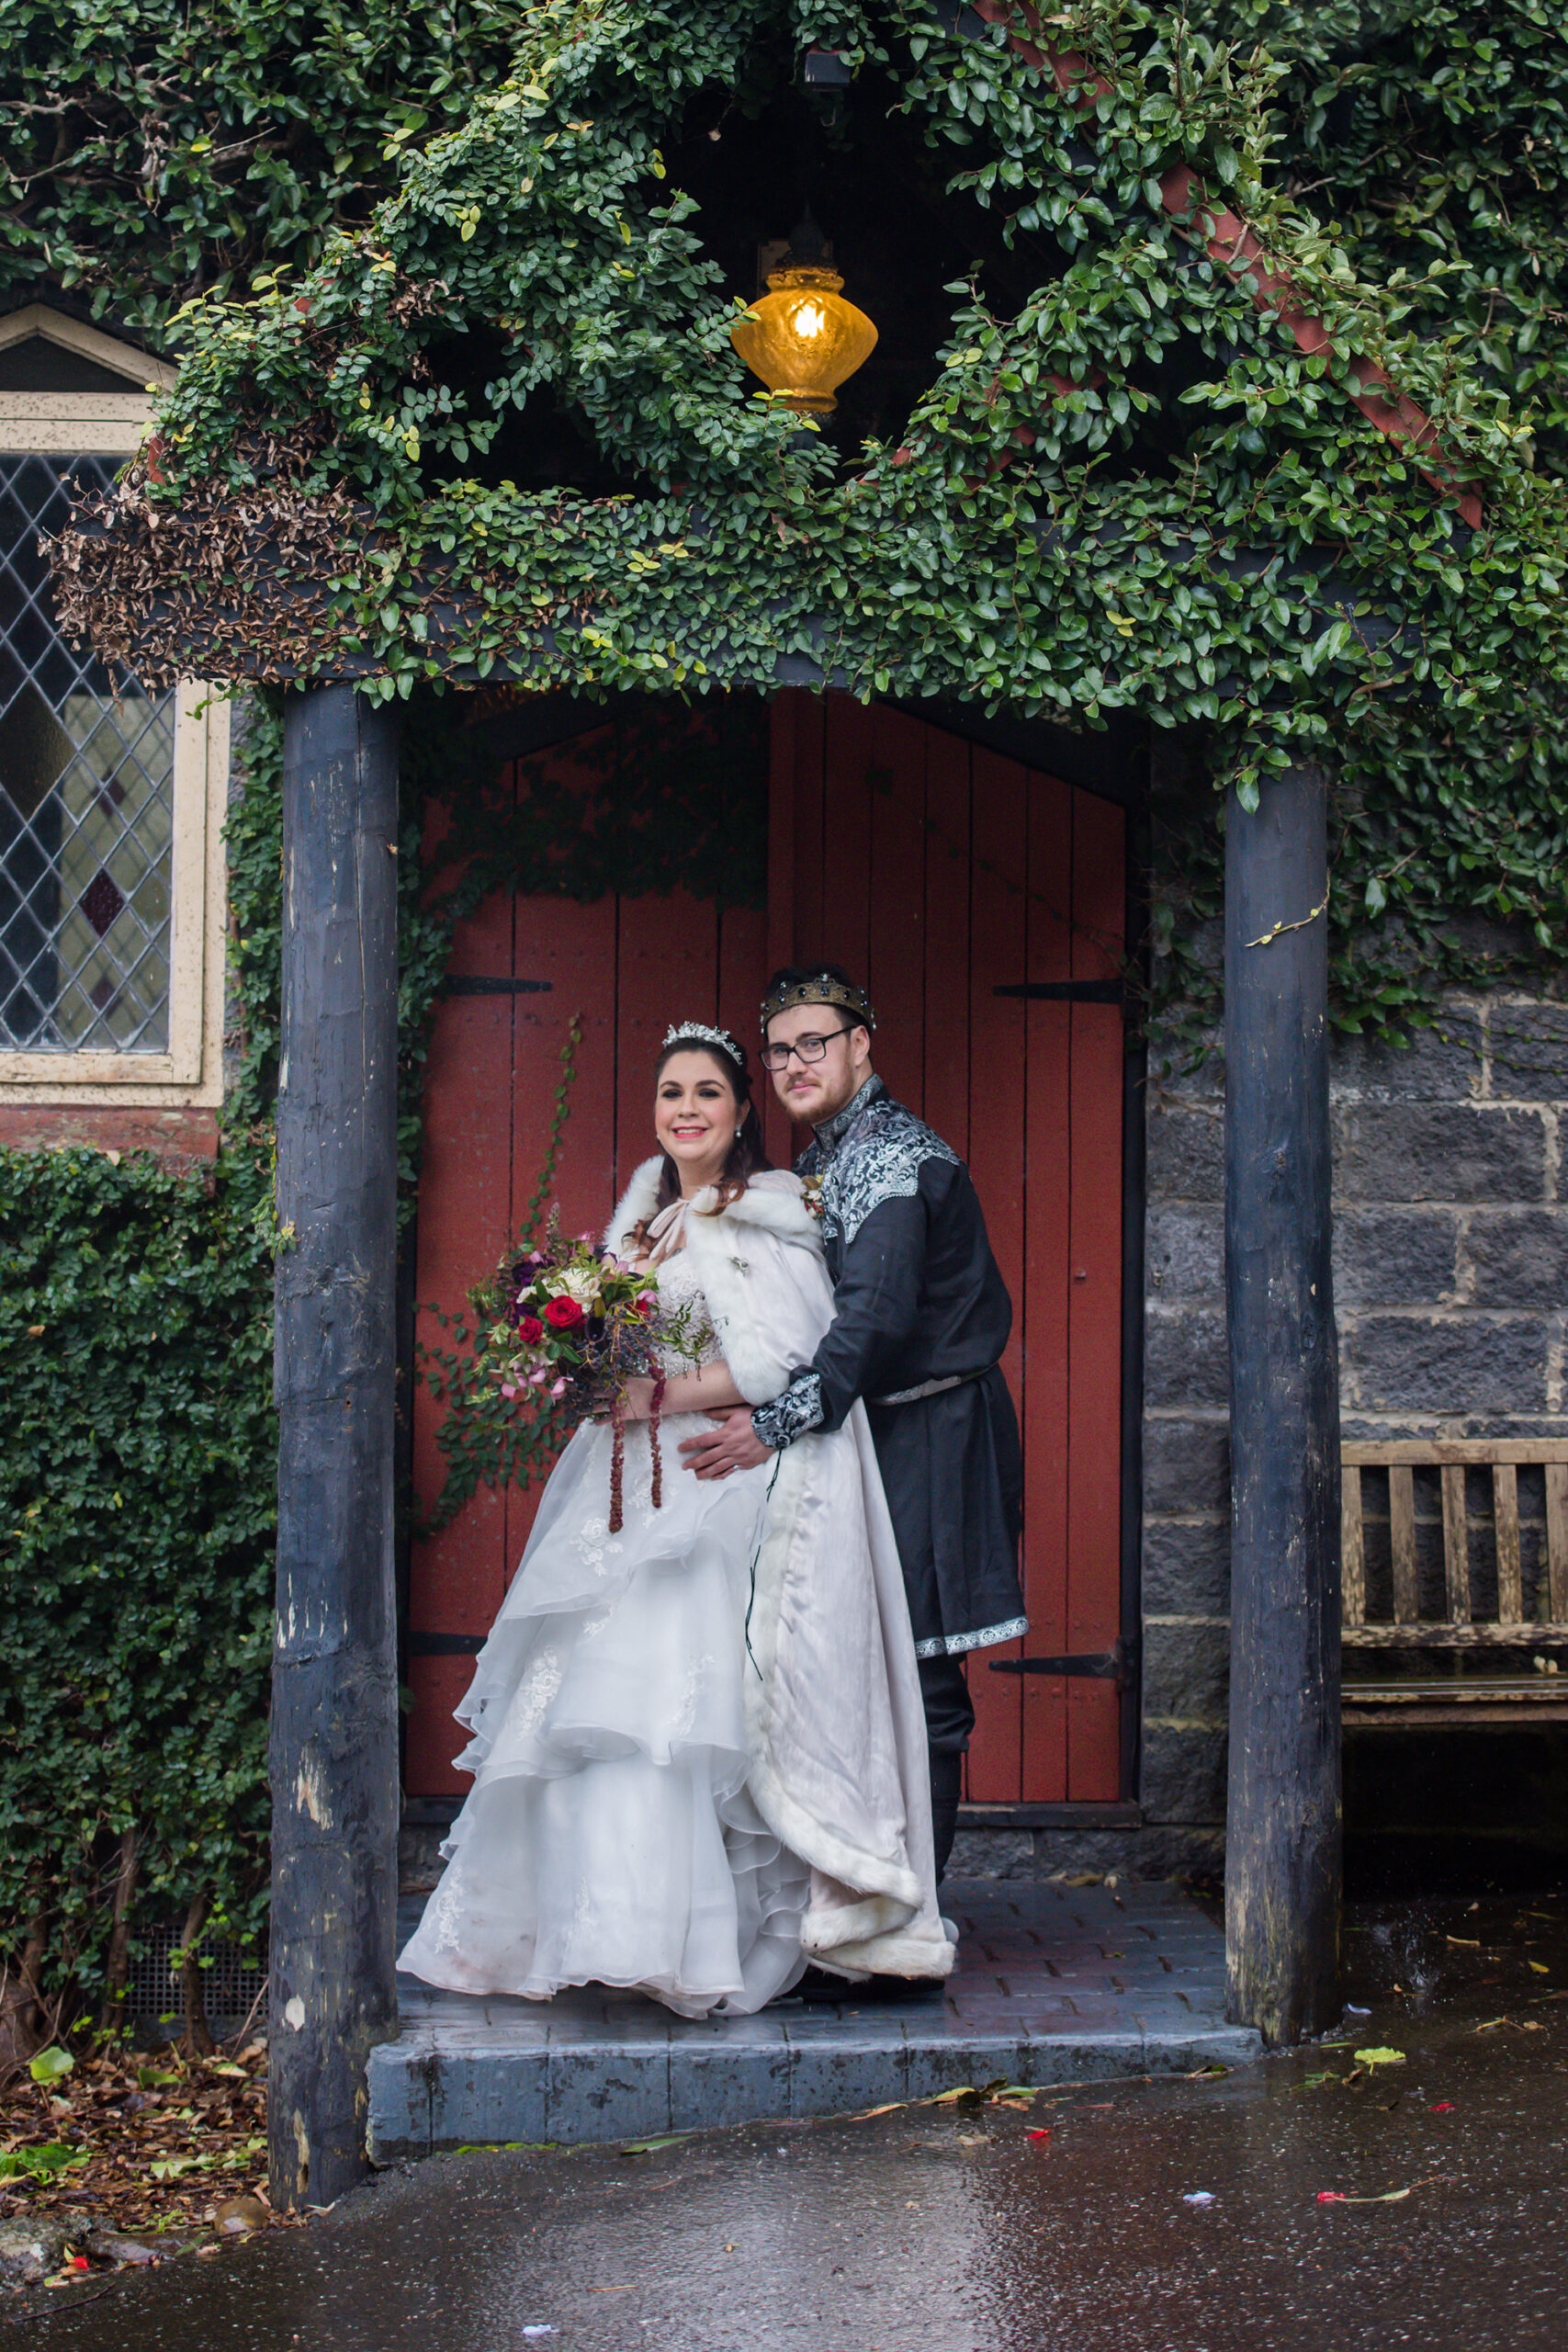 Denise Jake Medieval Wedding Photography House SBS 016 scaled